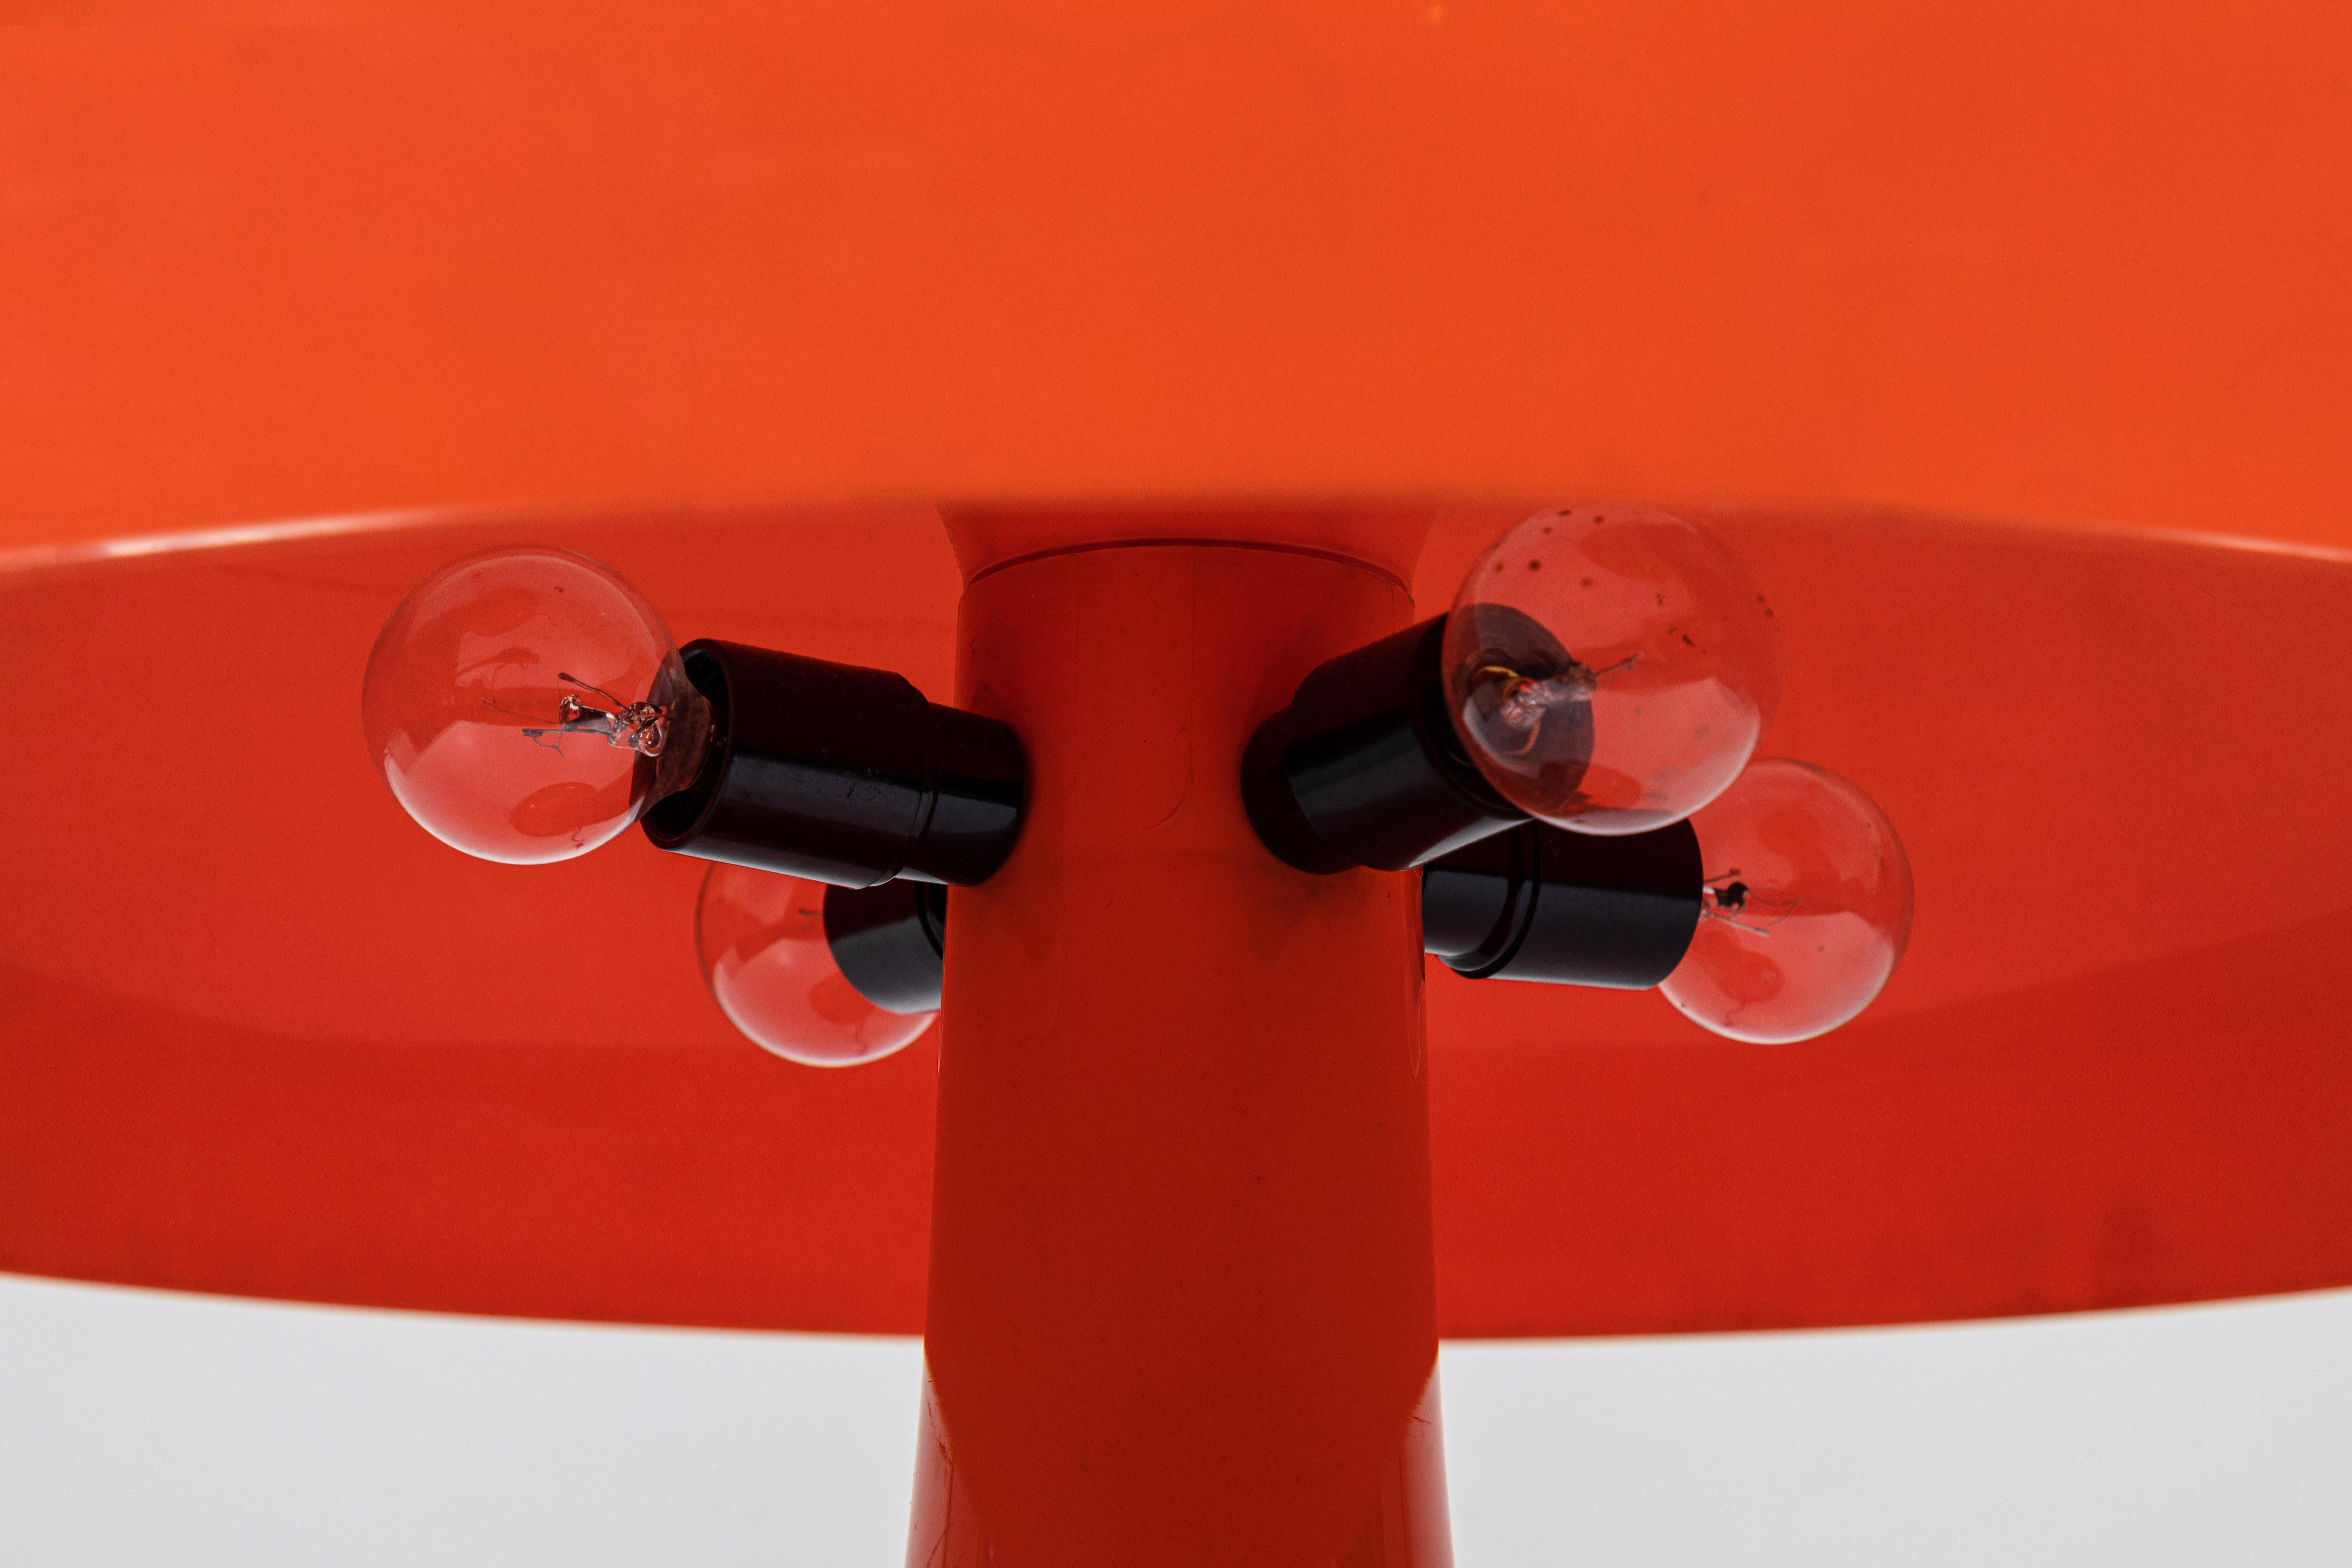 Mid-20th Century Nesso Table Lamp in Orange Color by Giancarlo Mattioli for Artemide, Italy 1960s